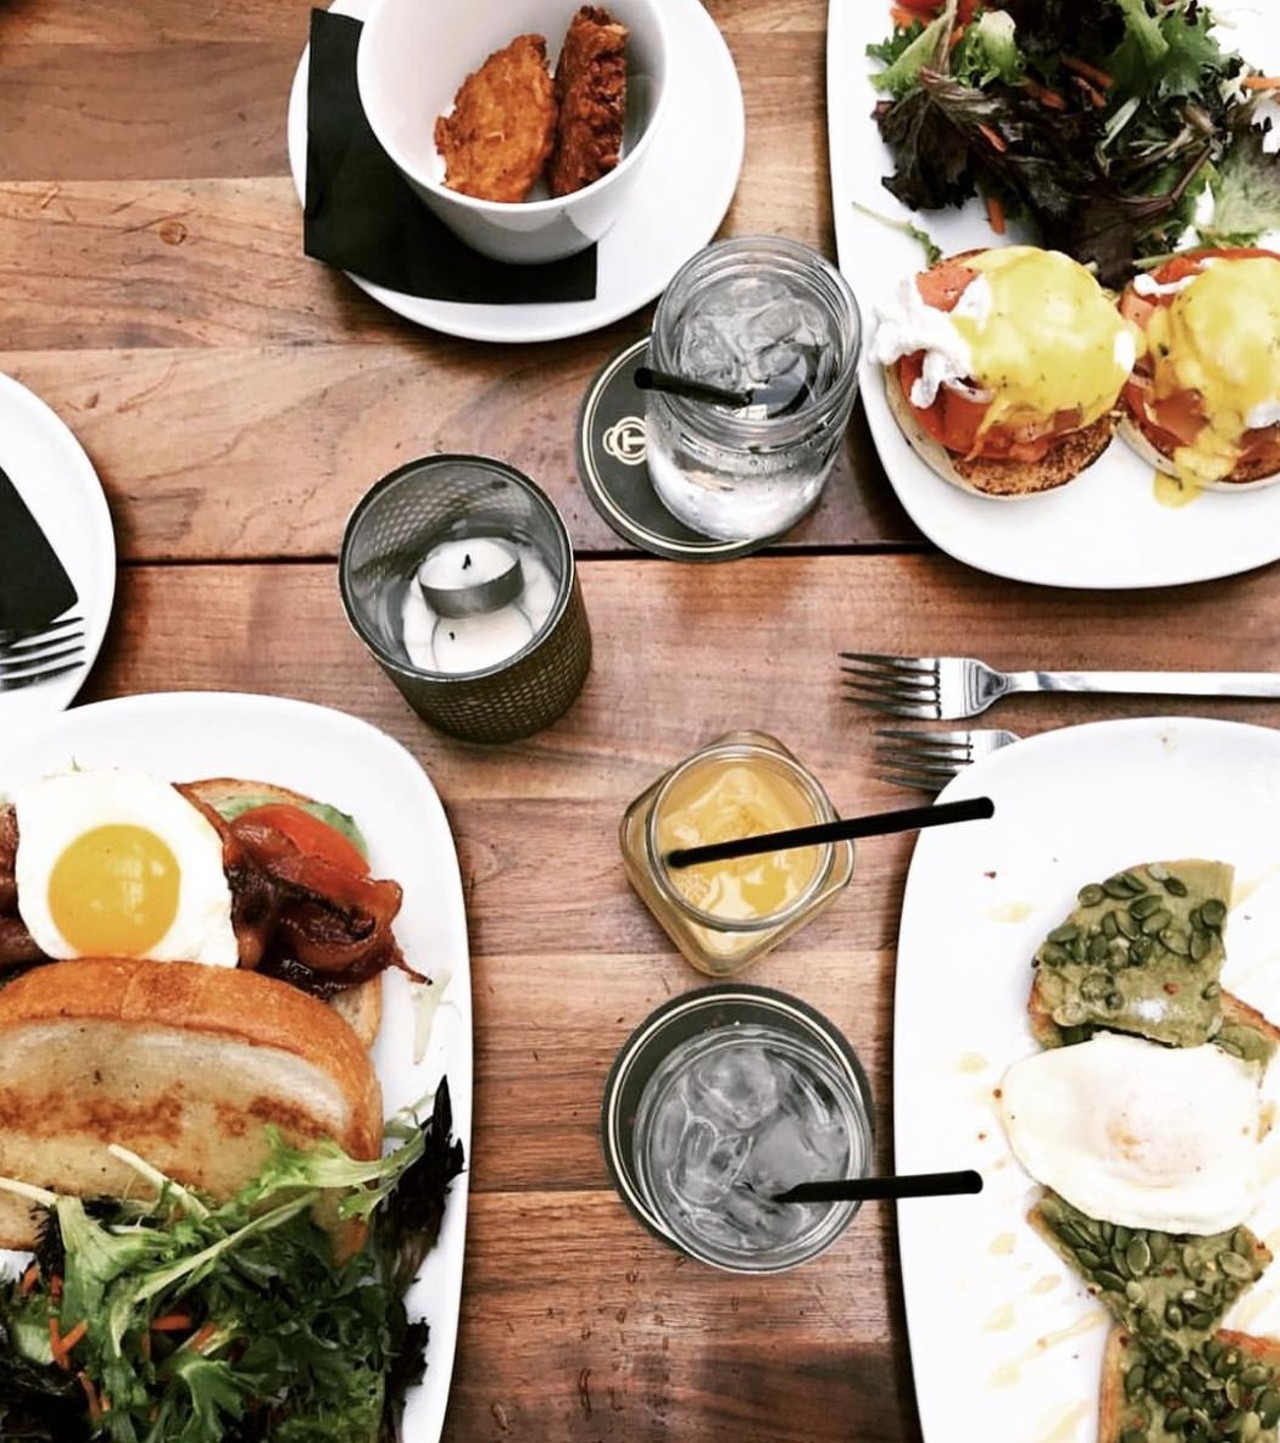 Townhouse
500 Woodward Ave, Detroit, MI 48226
Townhouse will be serving from their weekend brunch menu from 8 a.m. -2 p.m. 
Photo with permission from @eatattownhouse